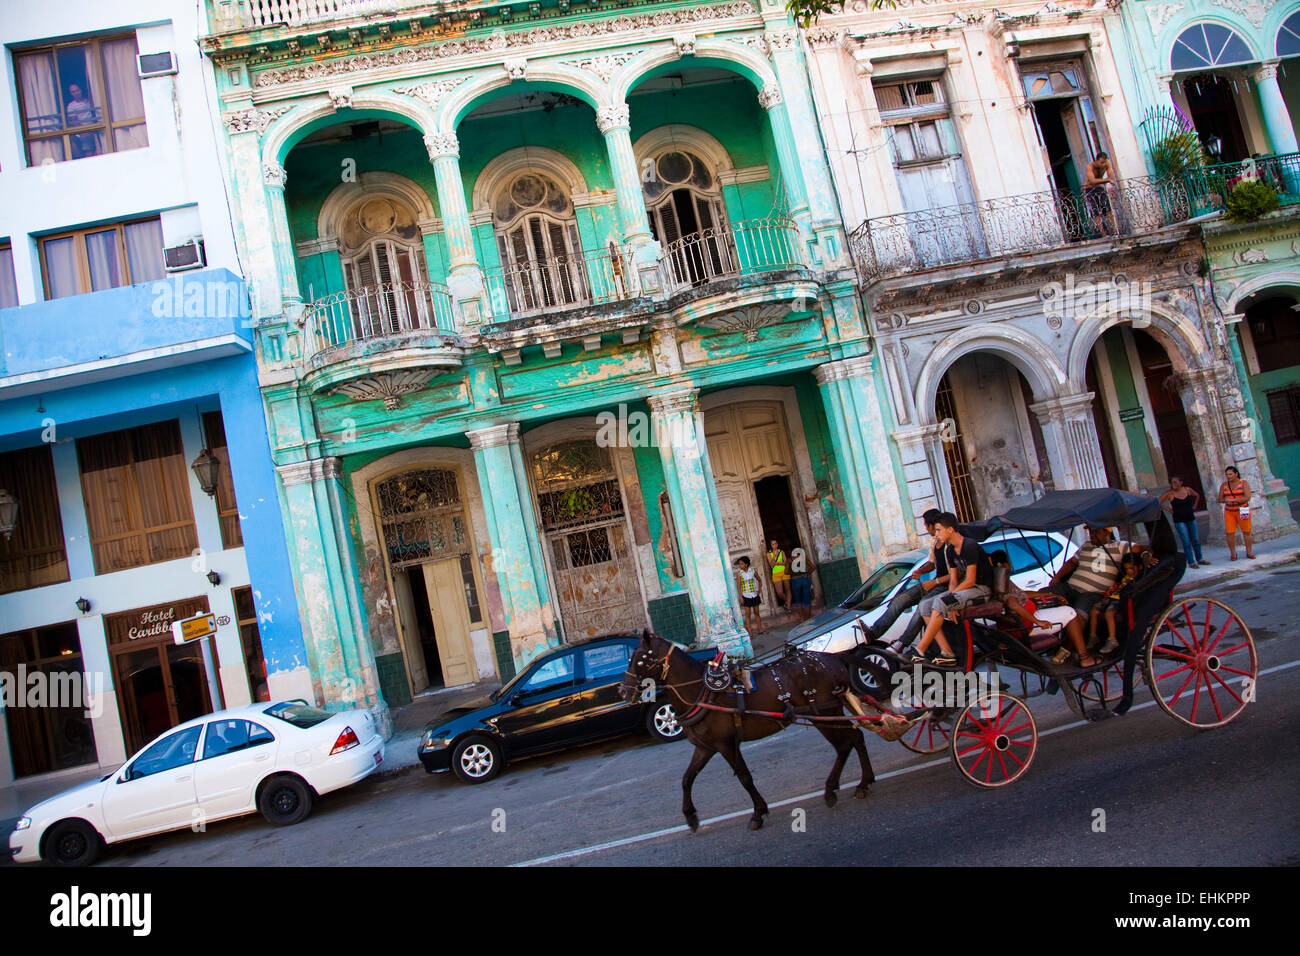 Crumbling old buildings and horse and cart, Havana, Cuba Stock Photo